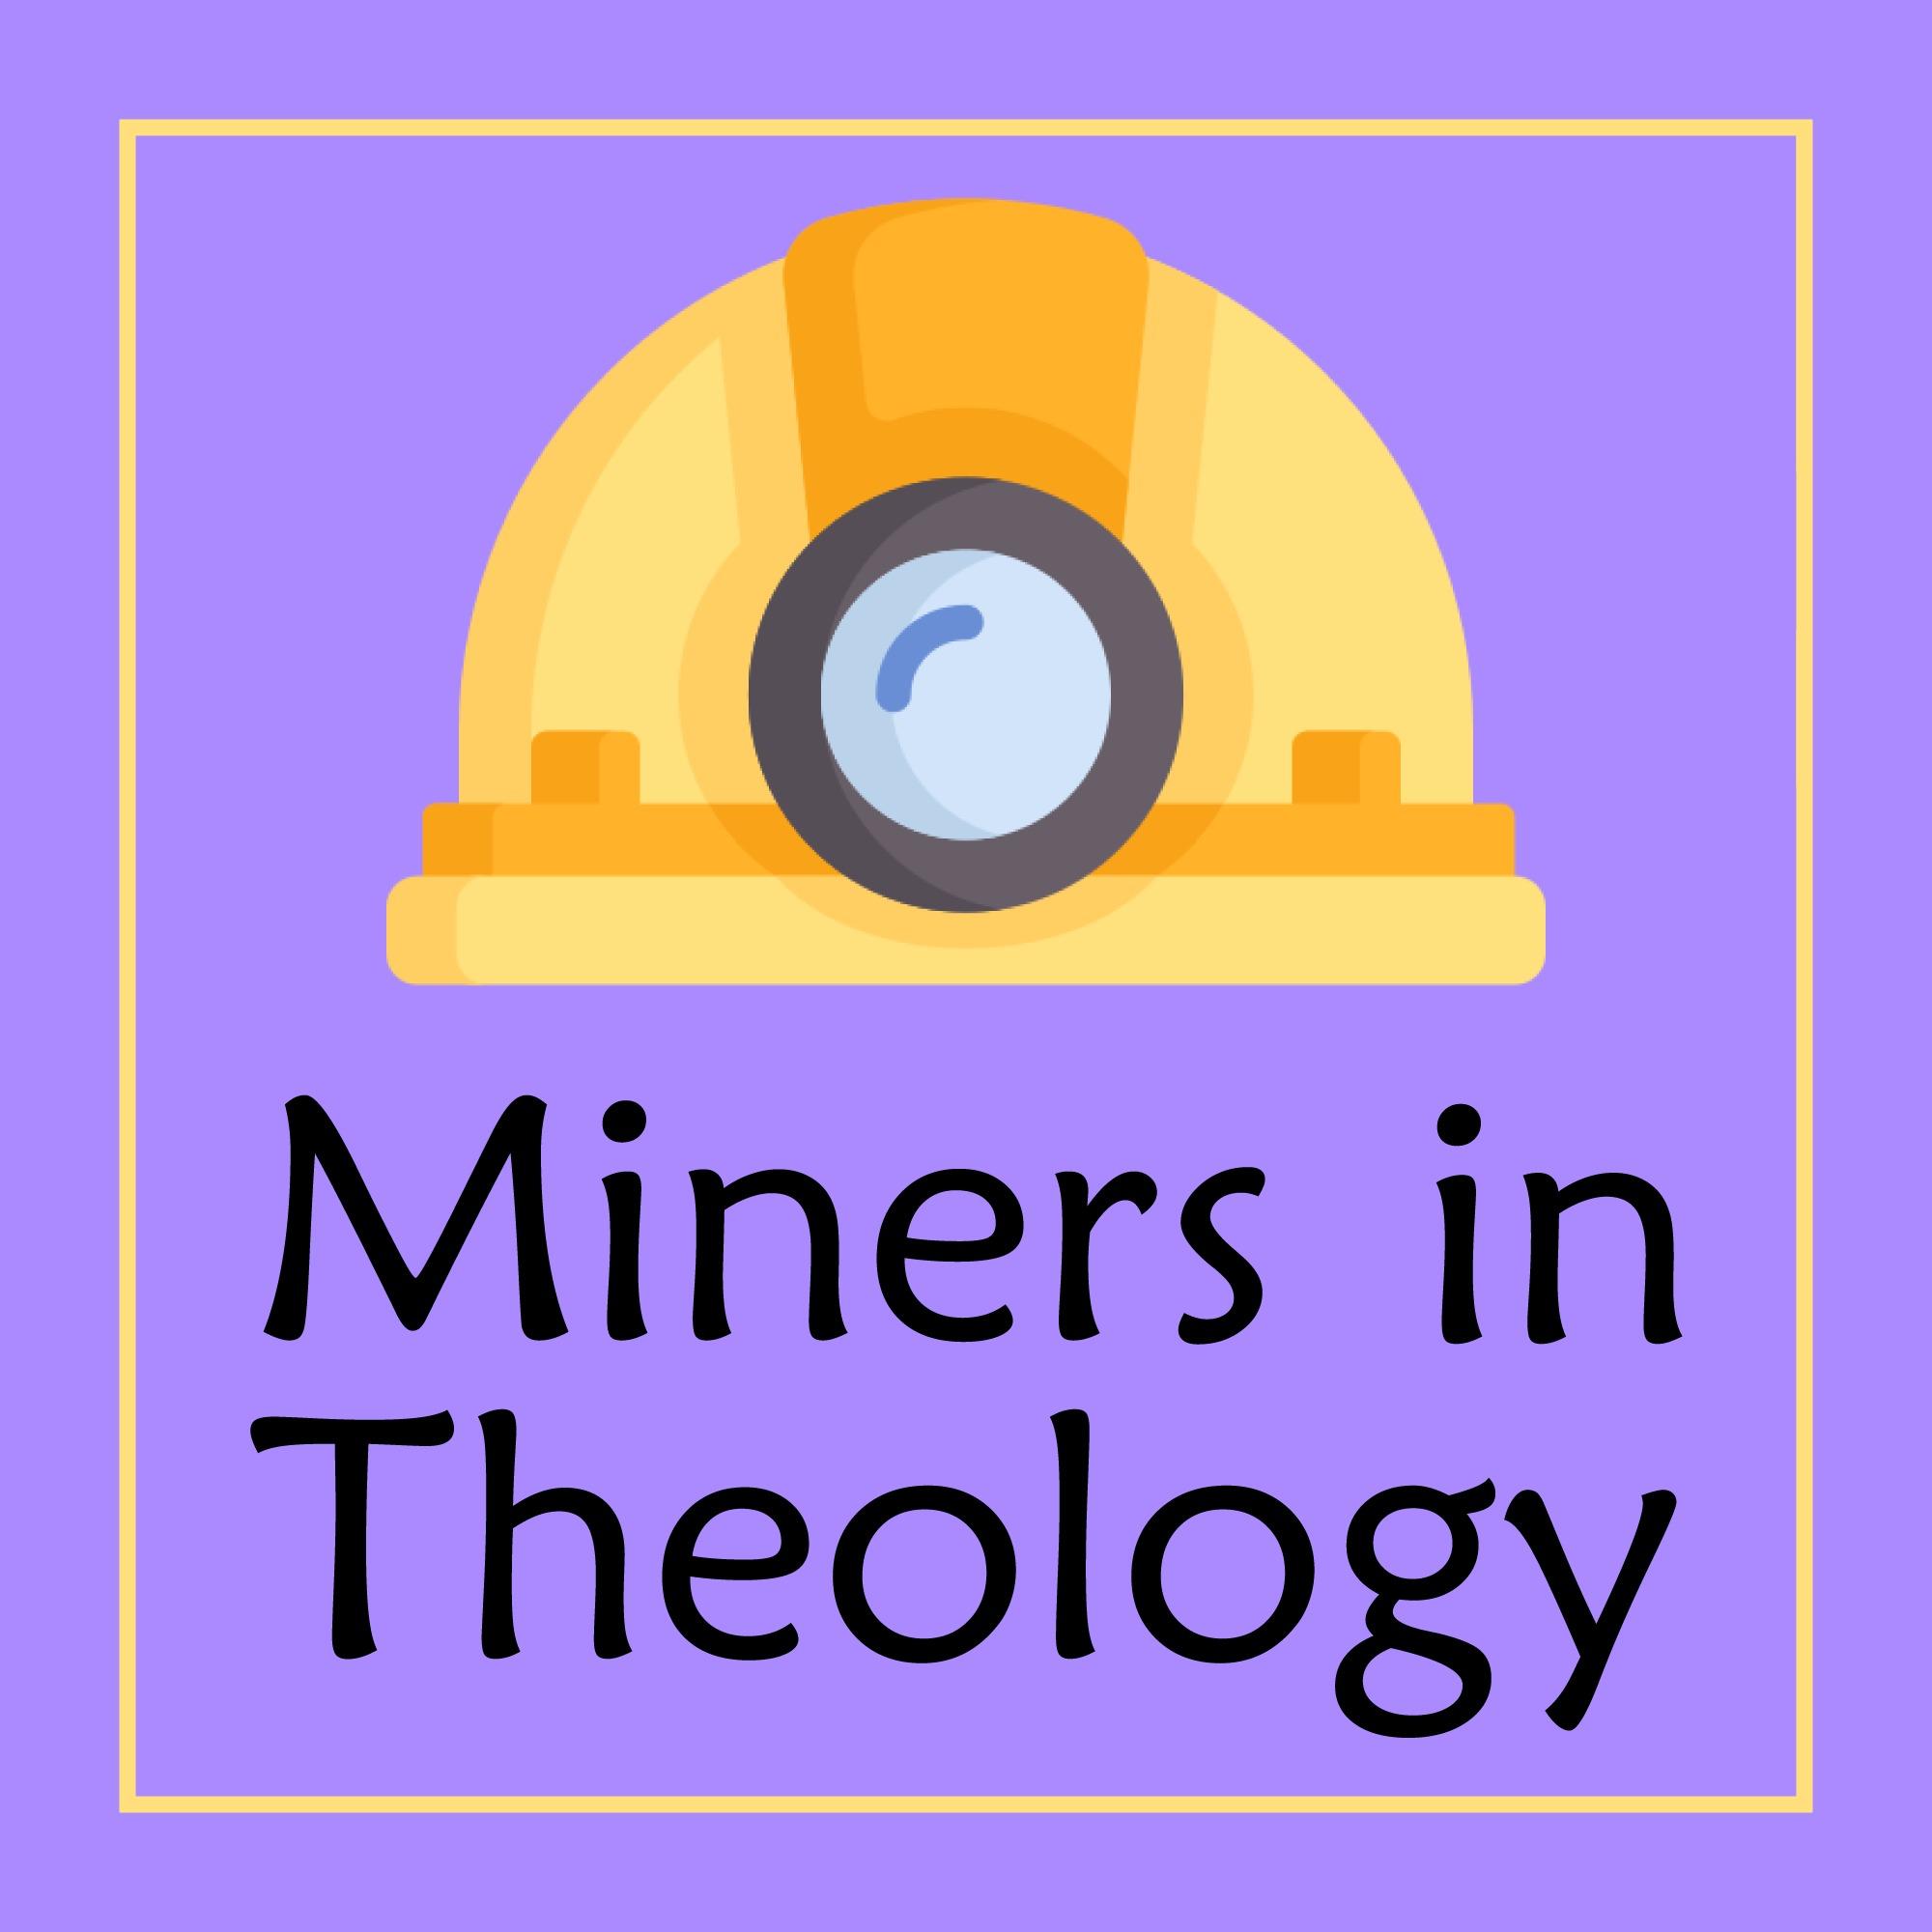 Miners in Theology